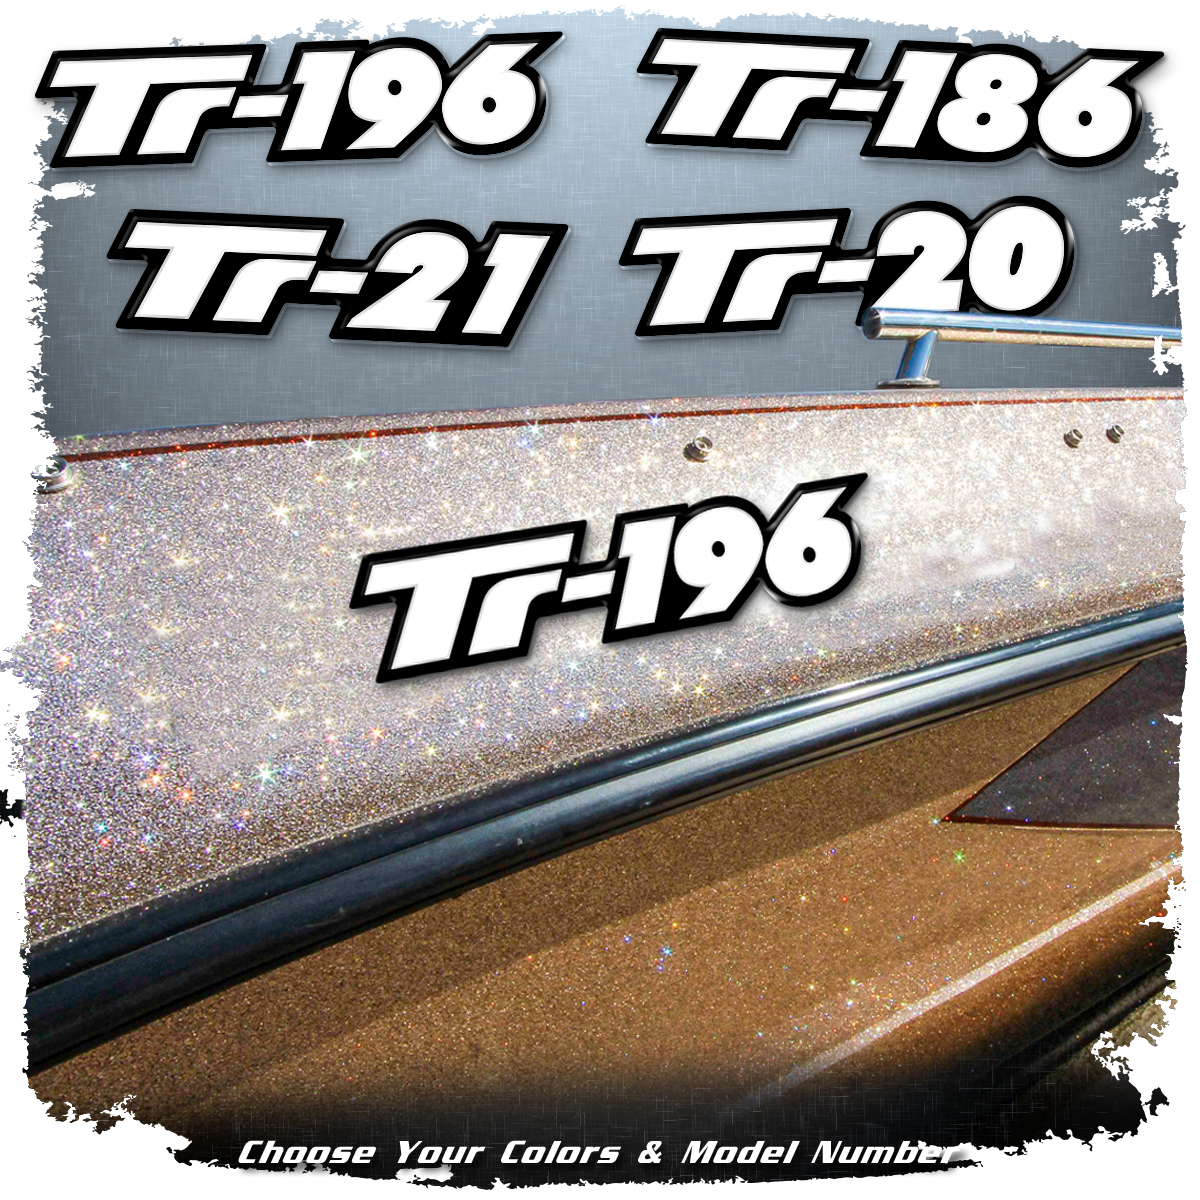 Domed Triton Boats Model Decal, Choose Your Model (1 Decal Included)